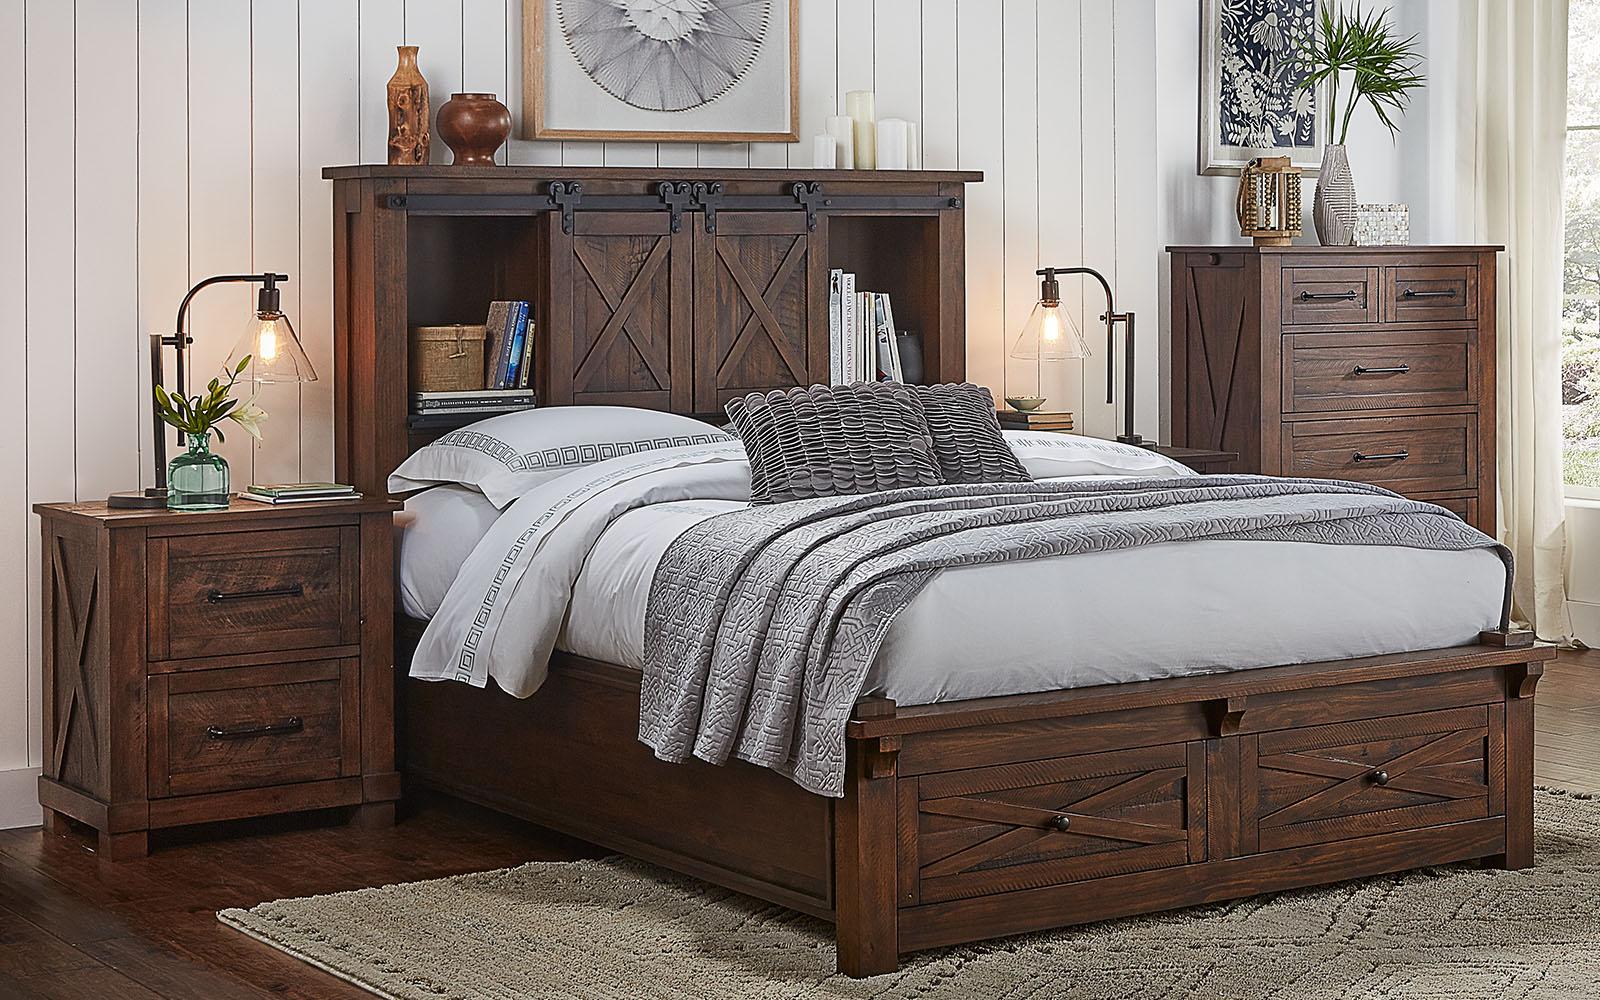 

    
King Storage Hdbr /Footboard Bed Brown SUVRT5131 A-America Sun Valley RT
